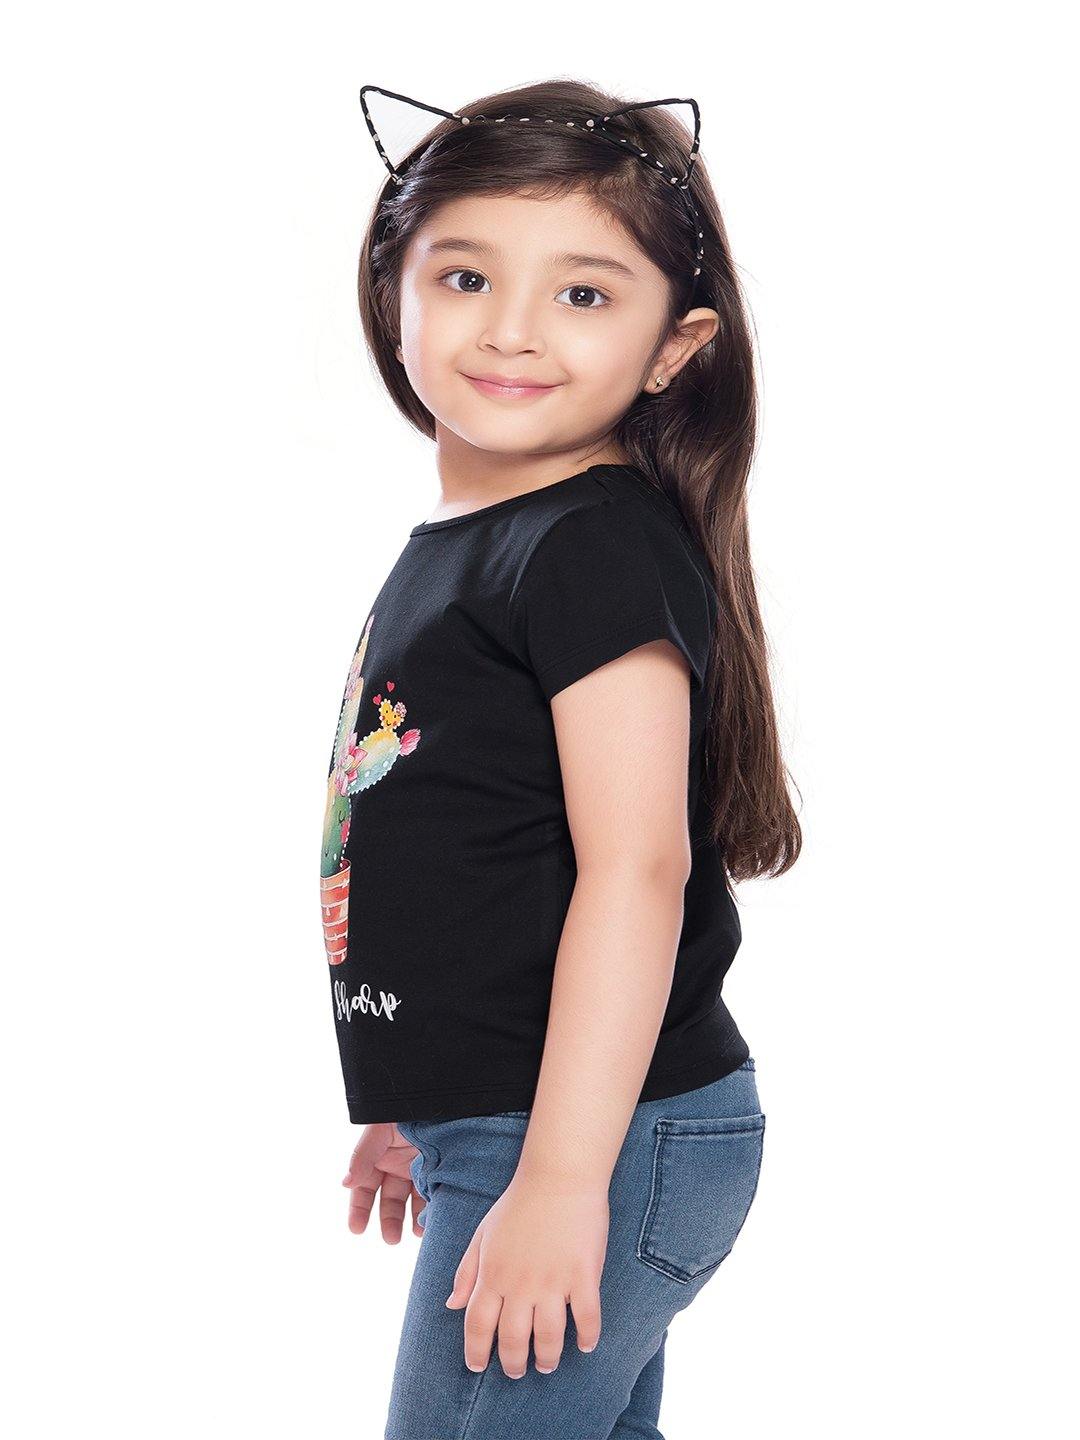 Tiny Baby Black Colored Top - T-110 Black - TINY BABY INDIA shop.tinybaby.in